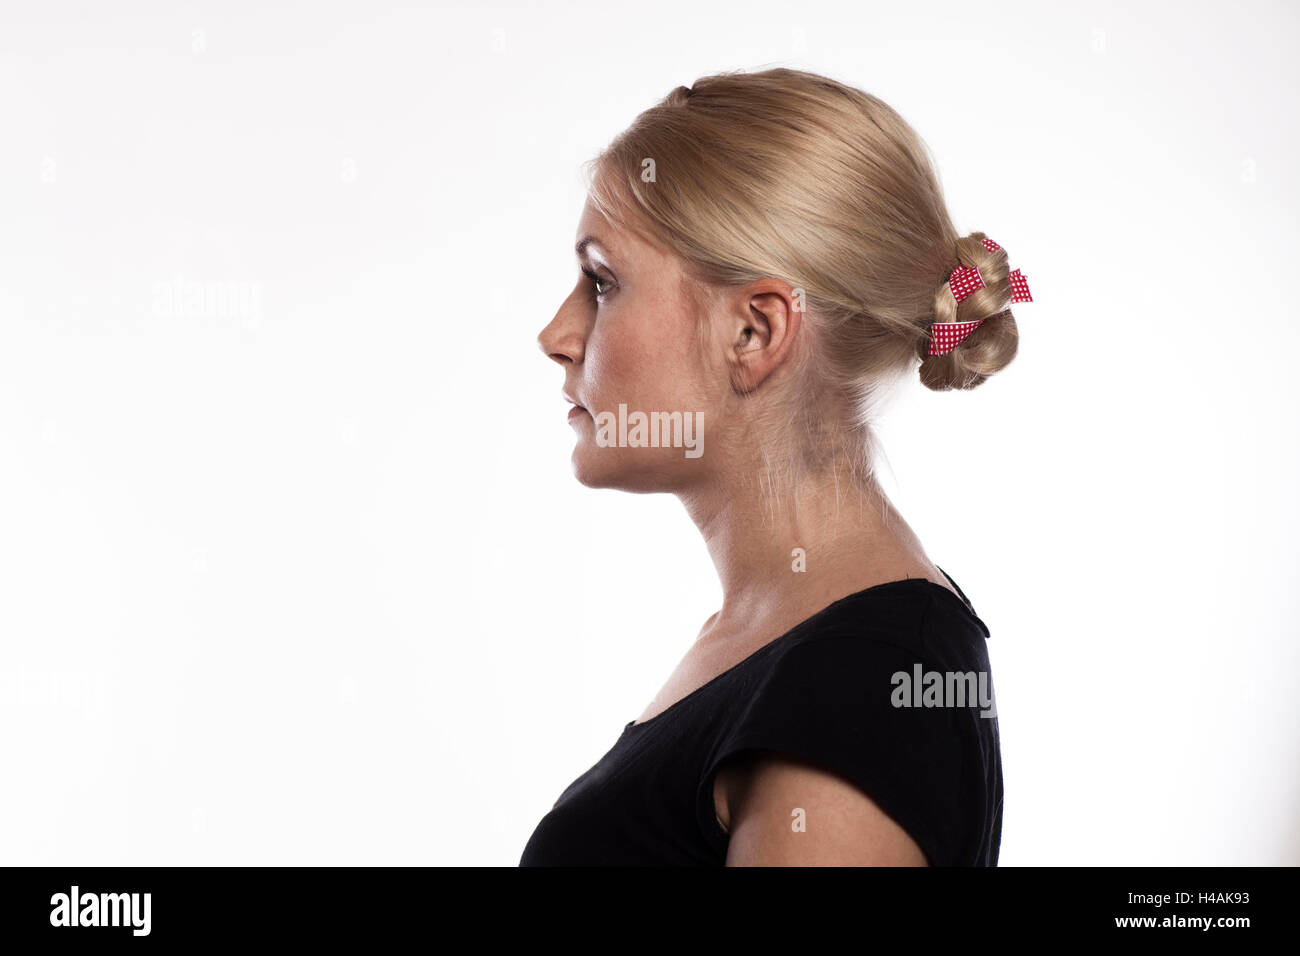 Bun with twisted plait and ribbon Stock Photo